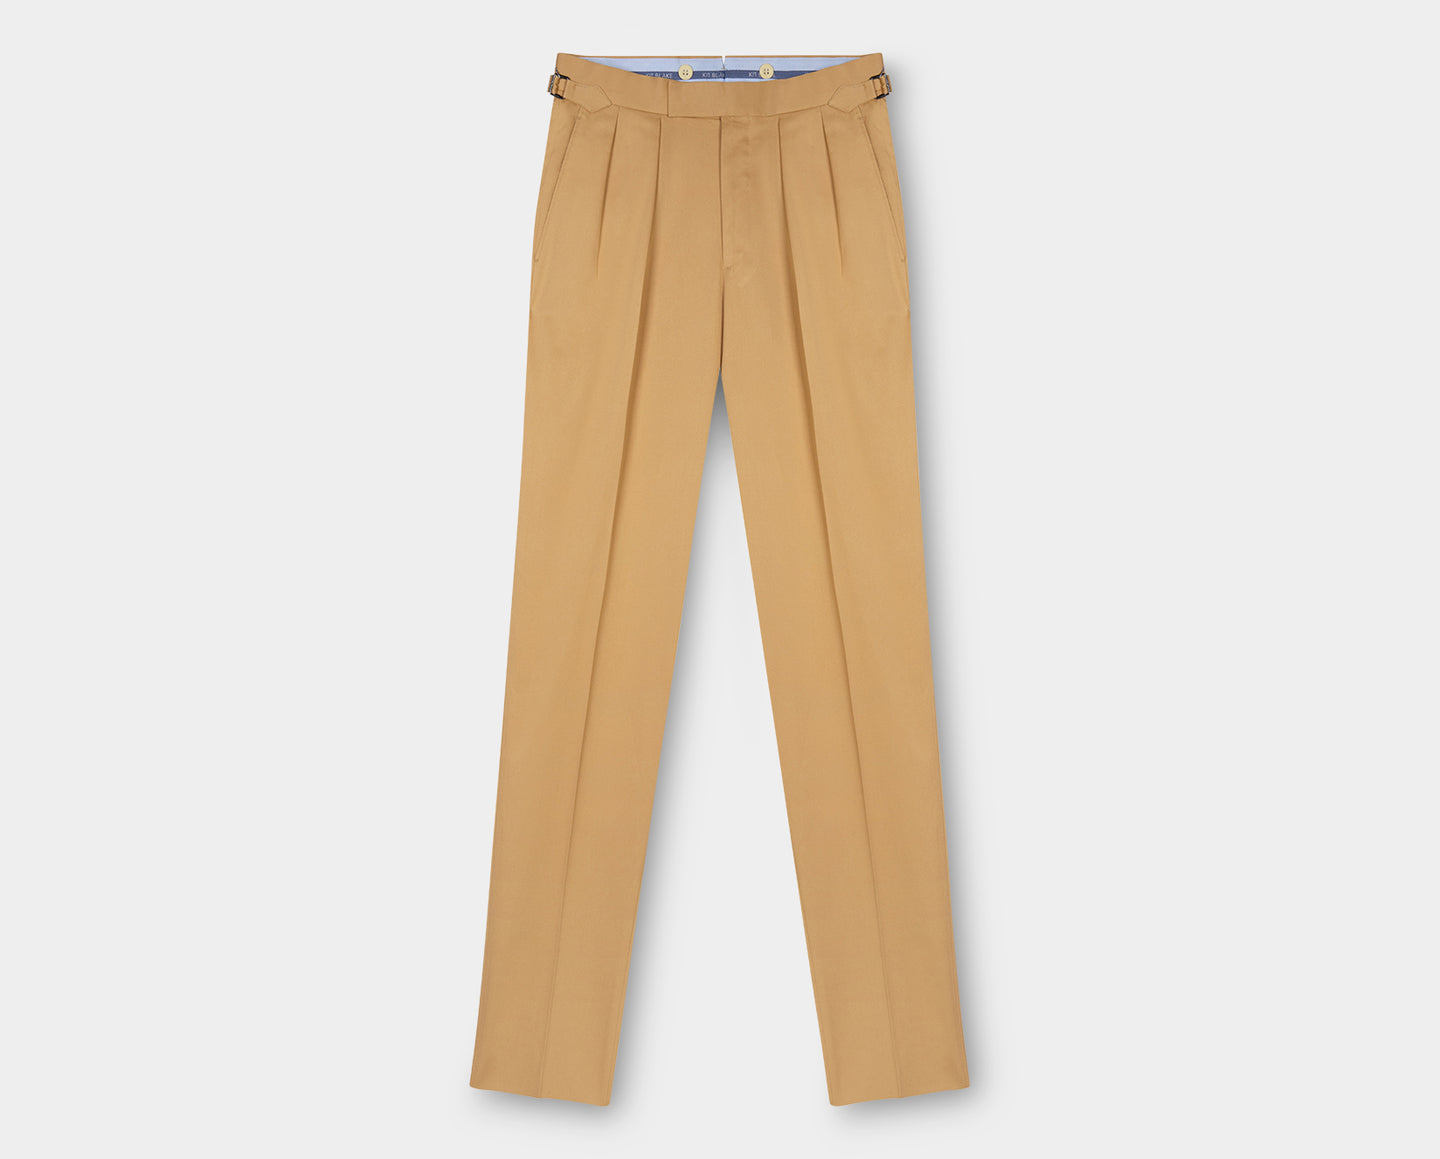 Grant Gold Cotton Trousers